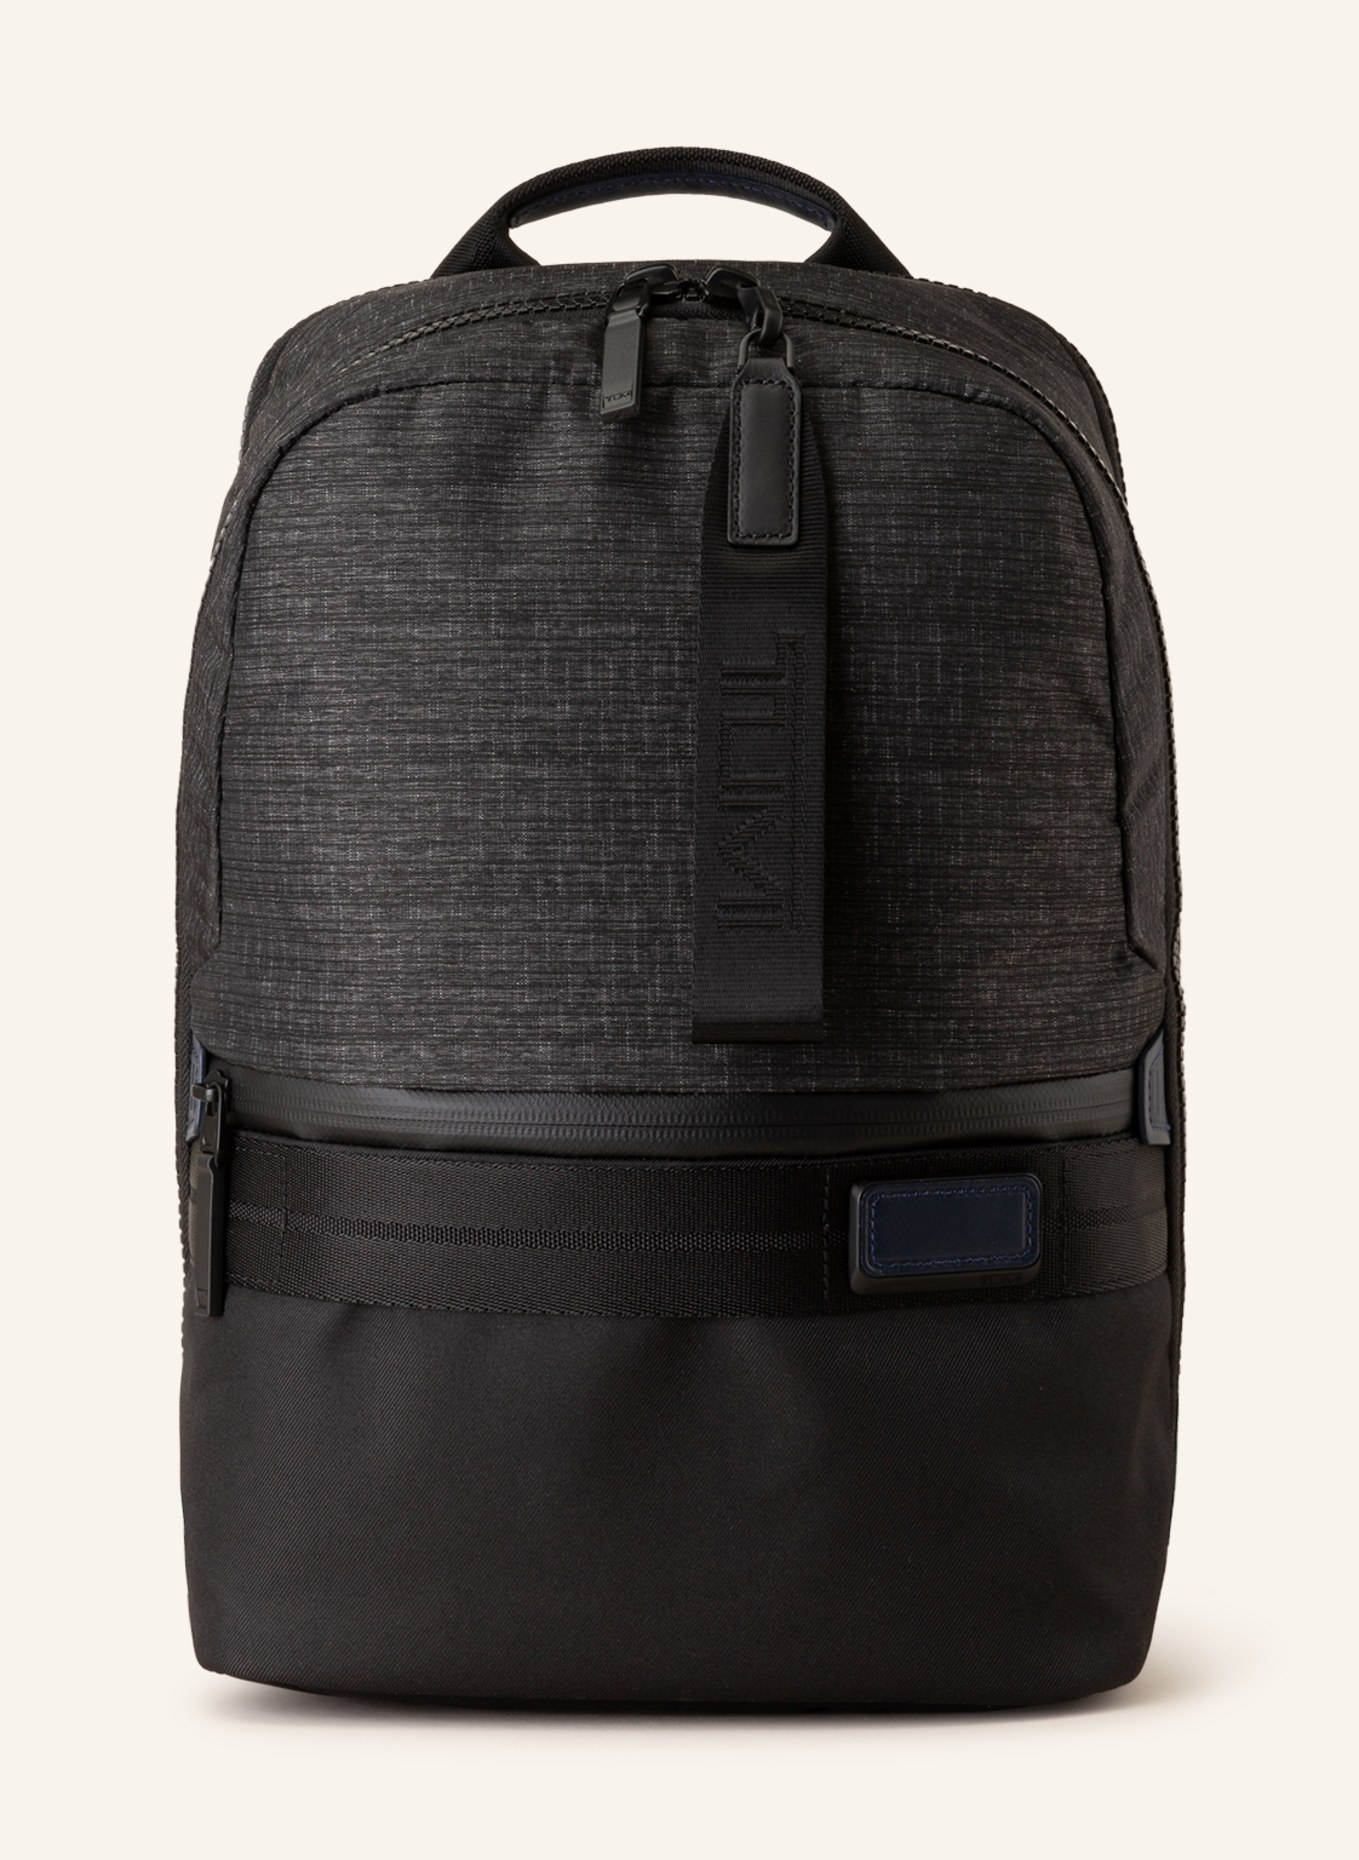 TUMI TAHOE Backpack NOTTAWAY with laptop compartment in dark gray